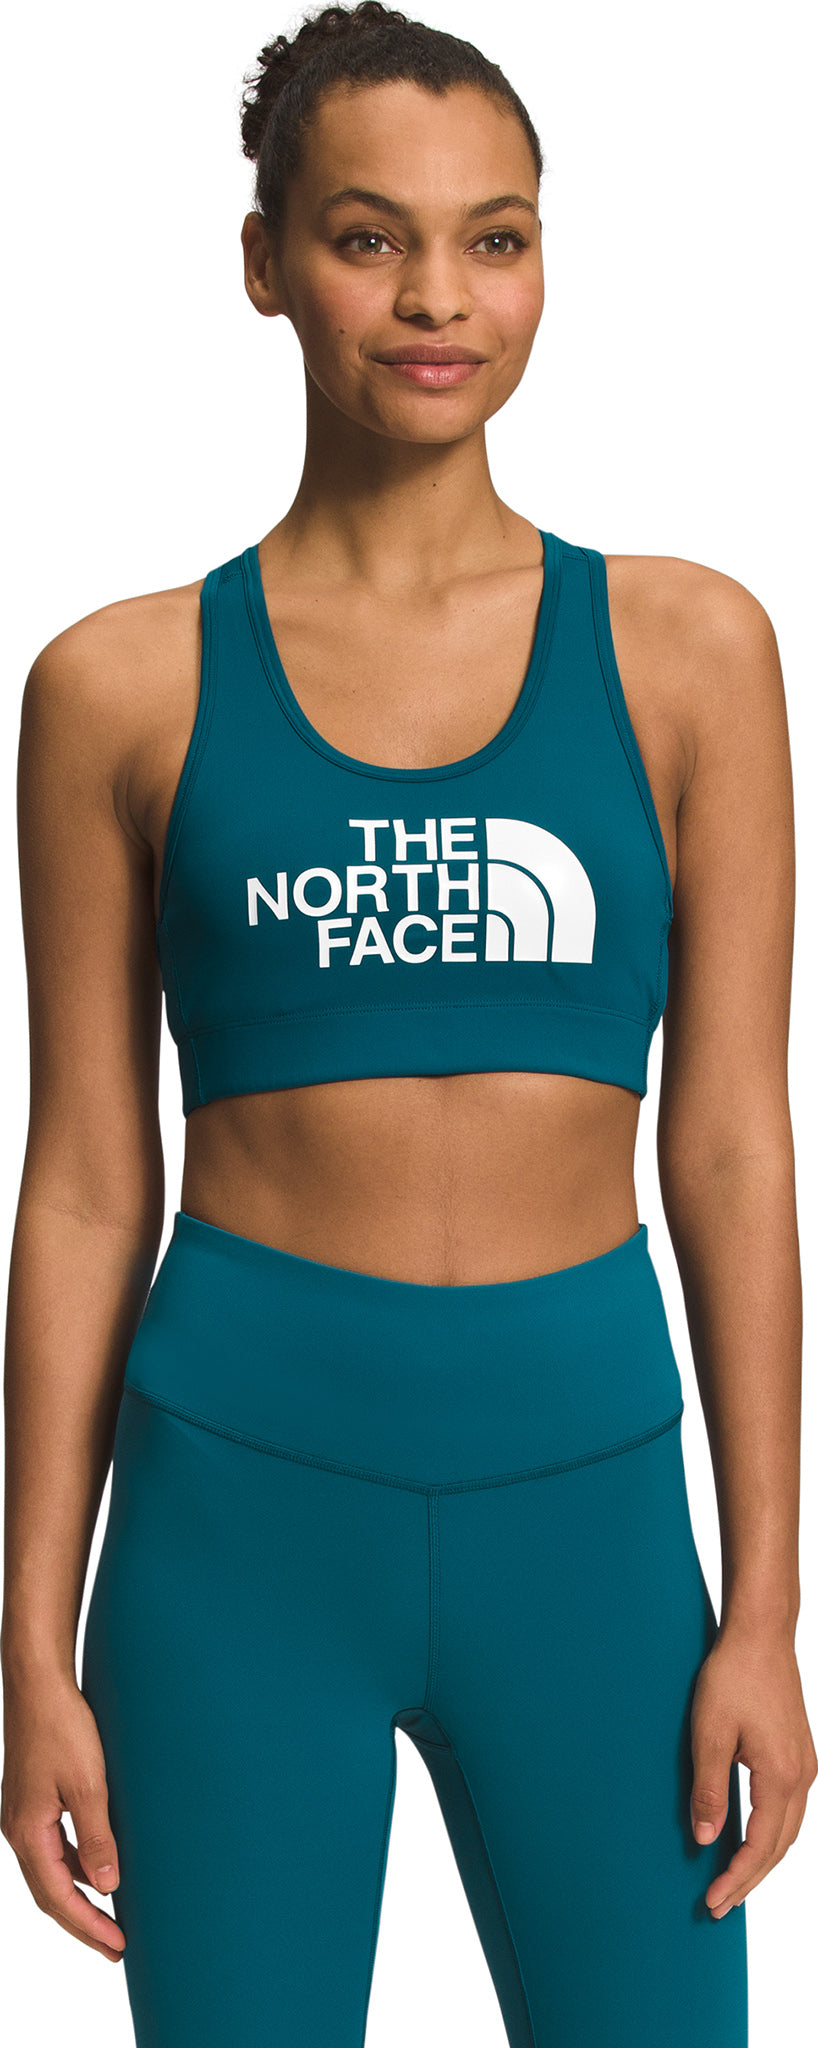 THE NORTH FACE Women's Elevation Bra